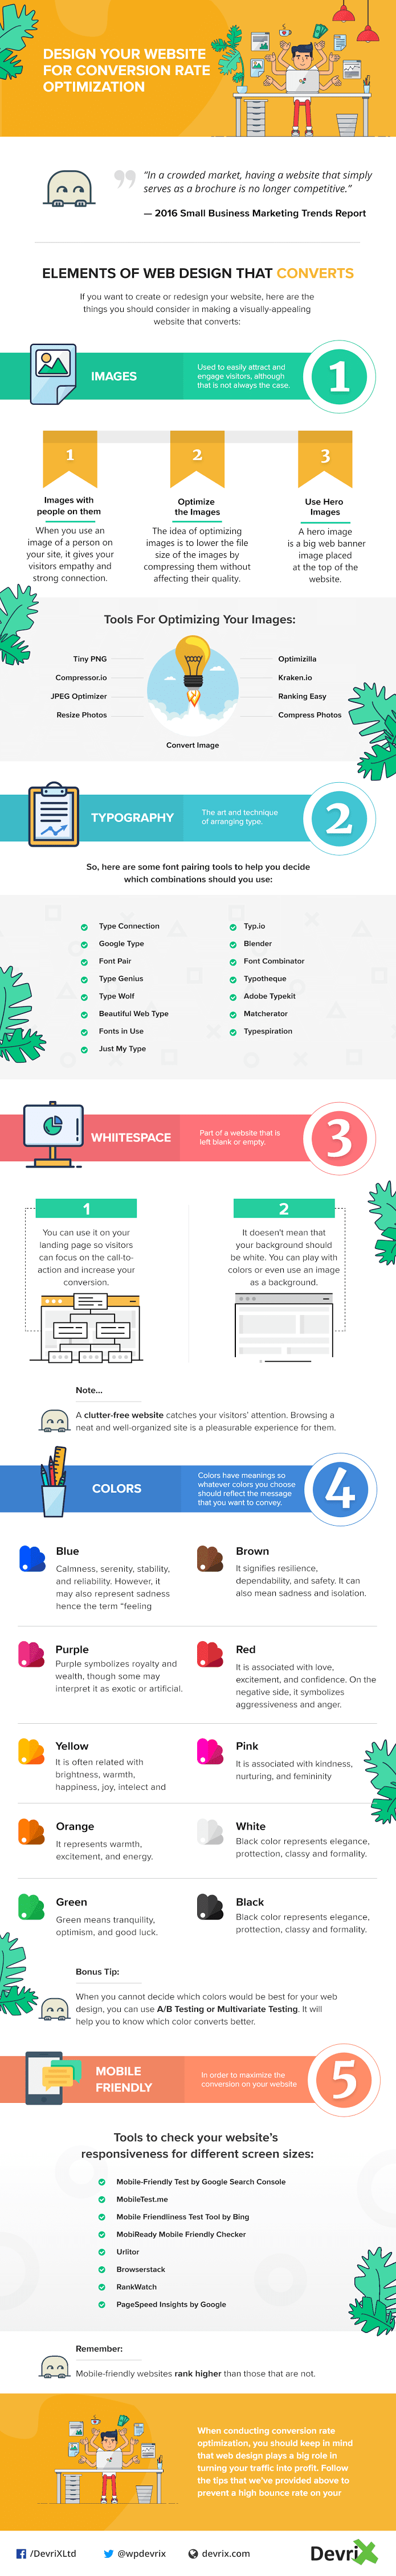 How to Design Your Website for Conversion Rate Optimization - #infographic